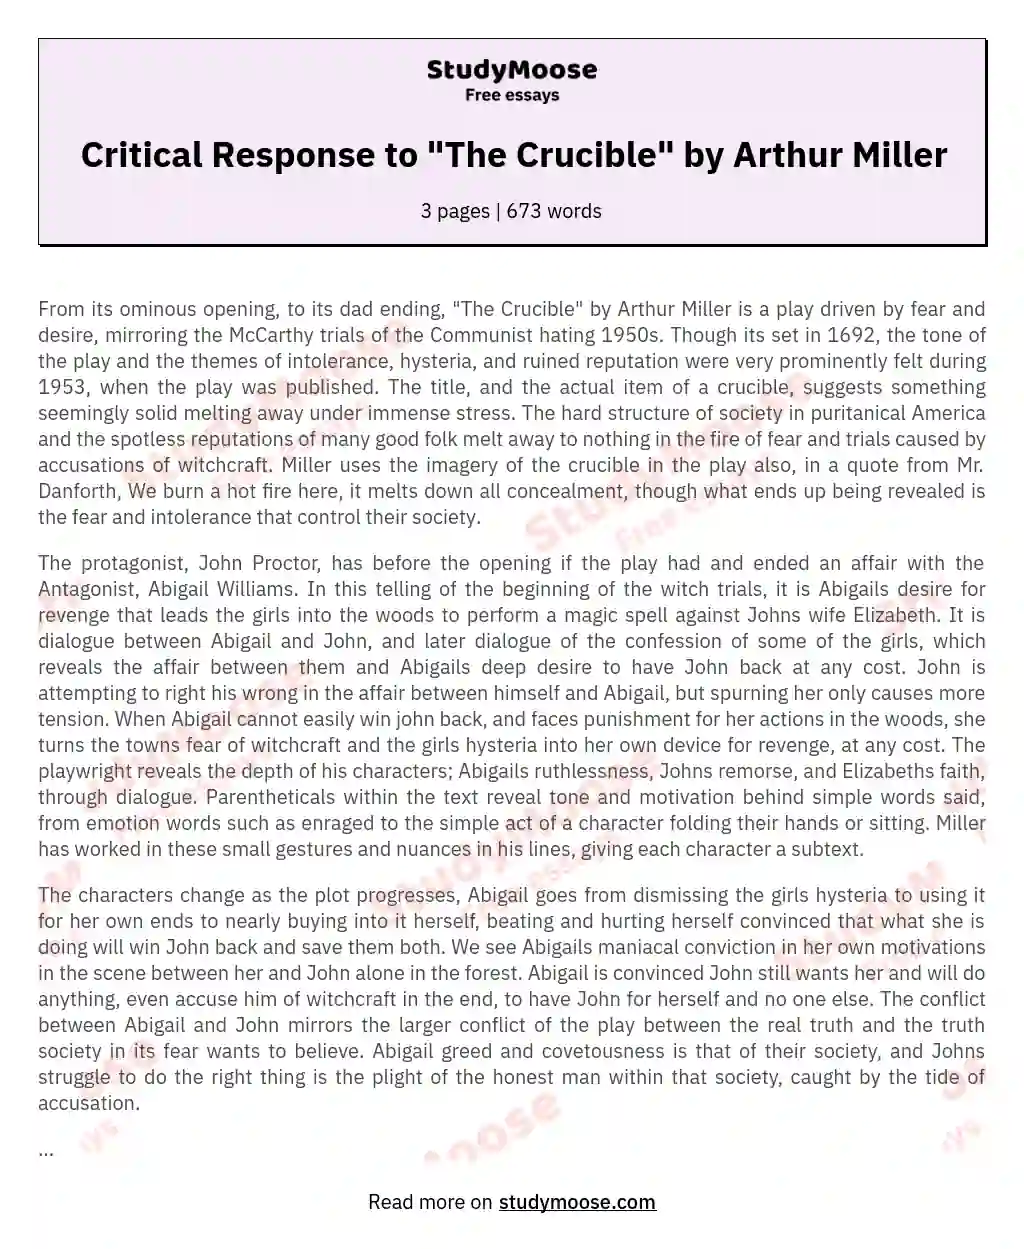 Critical Response to "The Crucible" by Arthur Miller essay